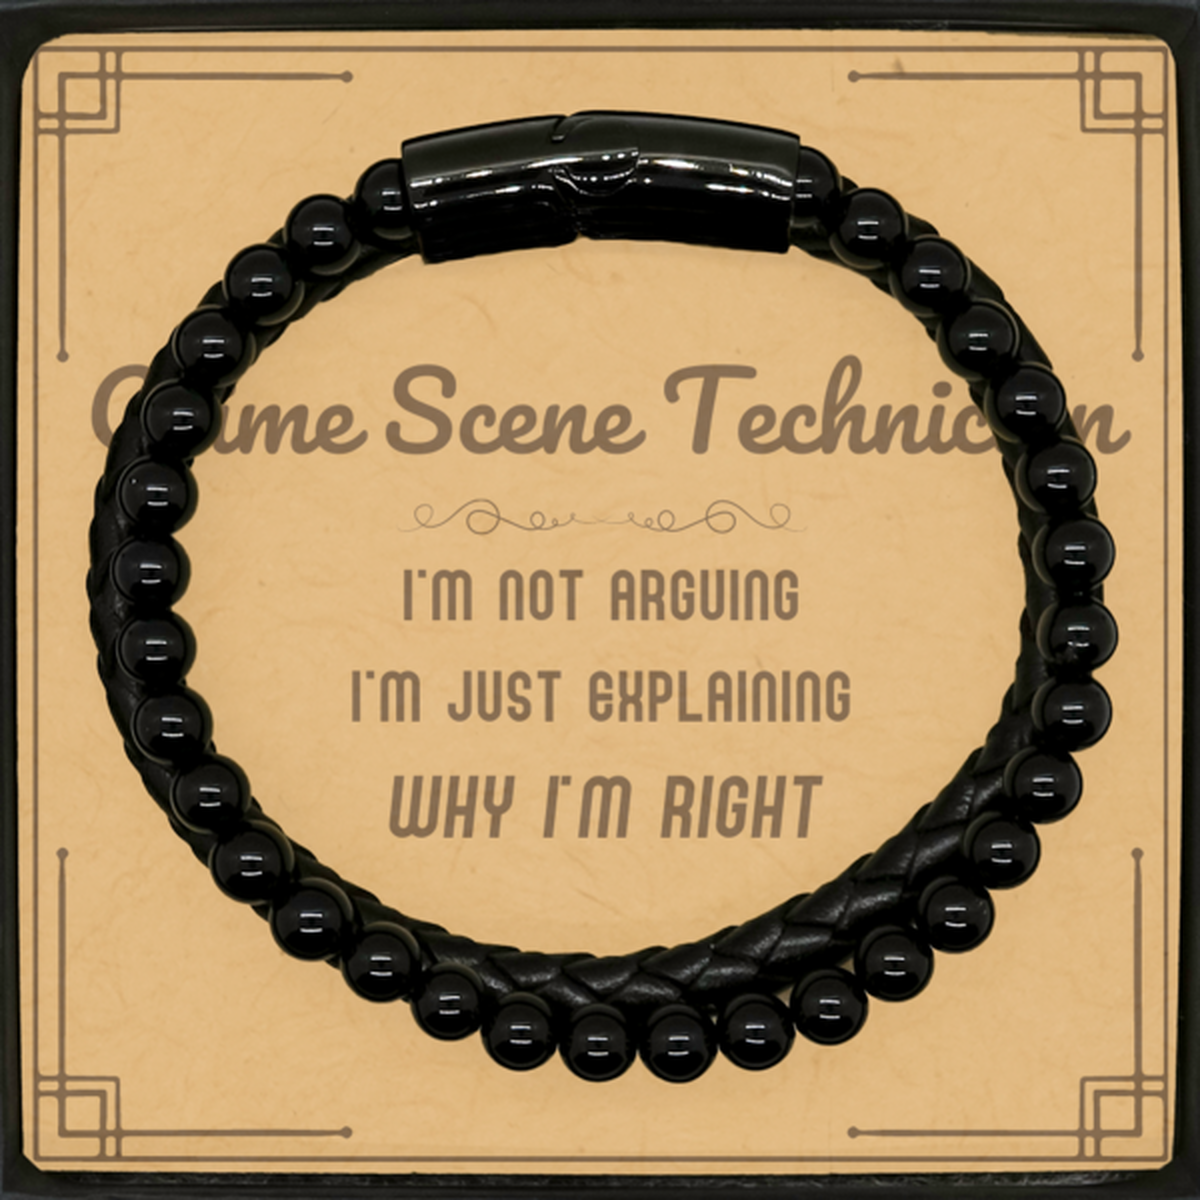 Crime Scene Technician I'm not Arguing. I'm Just Explaining Why I'm RIGHT Stone Leather Bracelets, Funny Saying Quote Crime Scene Technician Gifts For Crime Scene Technician Message Card Graduation Birthday Christmas Gifts for Men Women Coworker